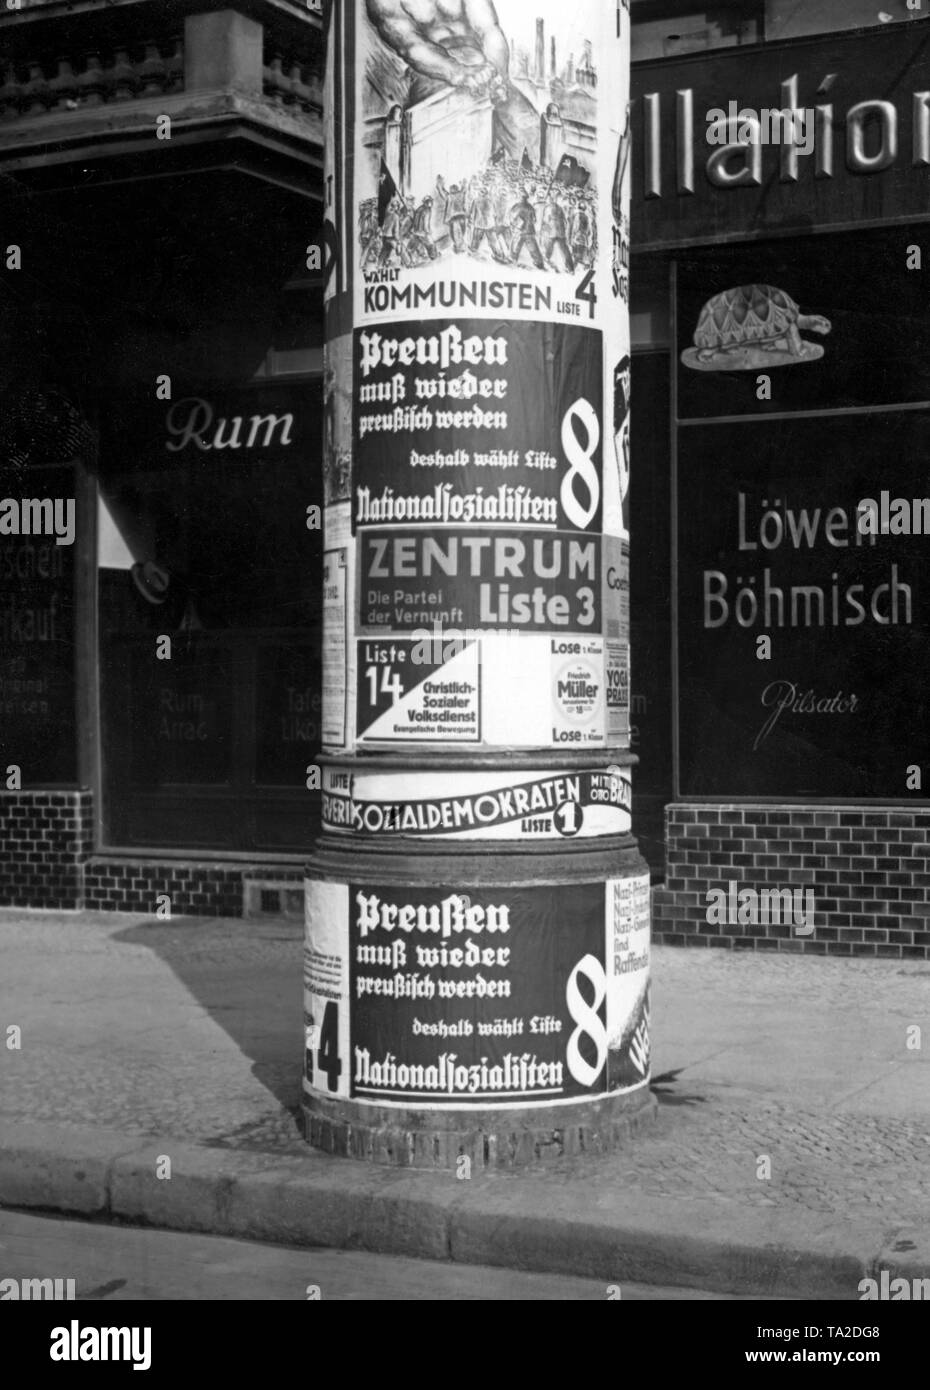 The parties NSDAP, SPD, Centre, KPD and Christian Social People's Service campaign with election posters on an advertising column on the occasion of the Prussian Landtag elections. The NSDAP campaigns with the slogan "Prussia must be Prussian again, so vote for List 8, the National Socialists." The SPD, with their top candidate, Otto Braun, and the Centre Party name themselves as a "party of rationality". Stock Photo